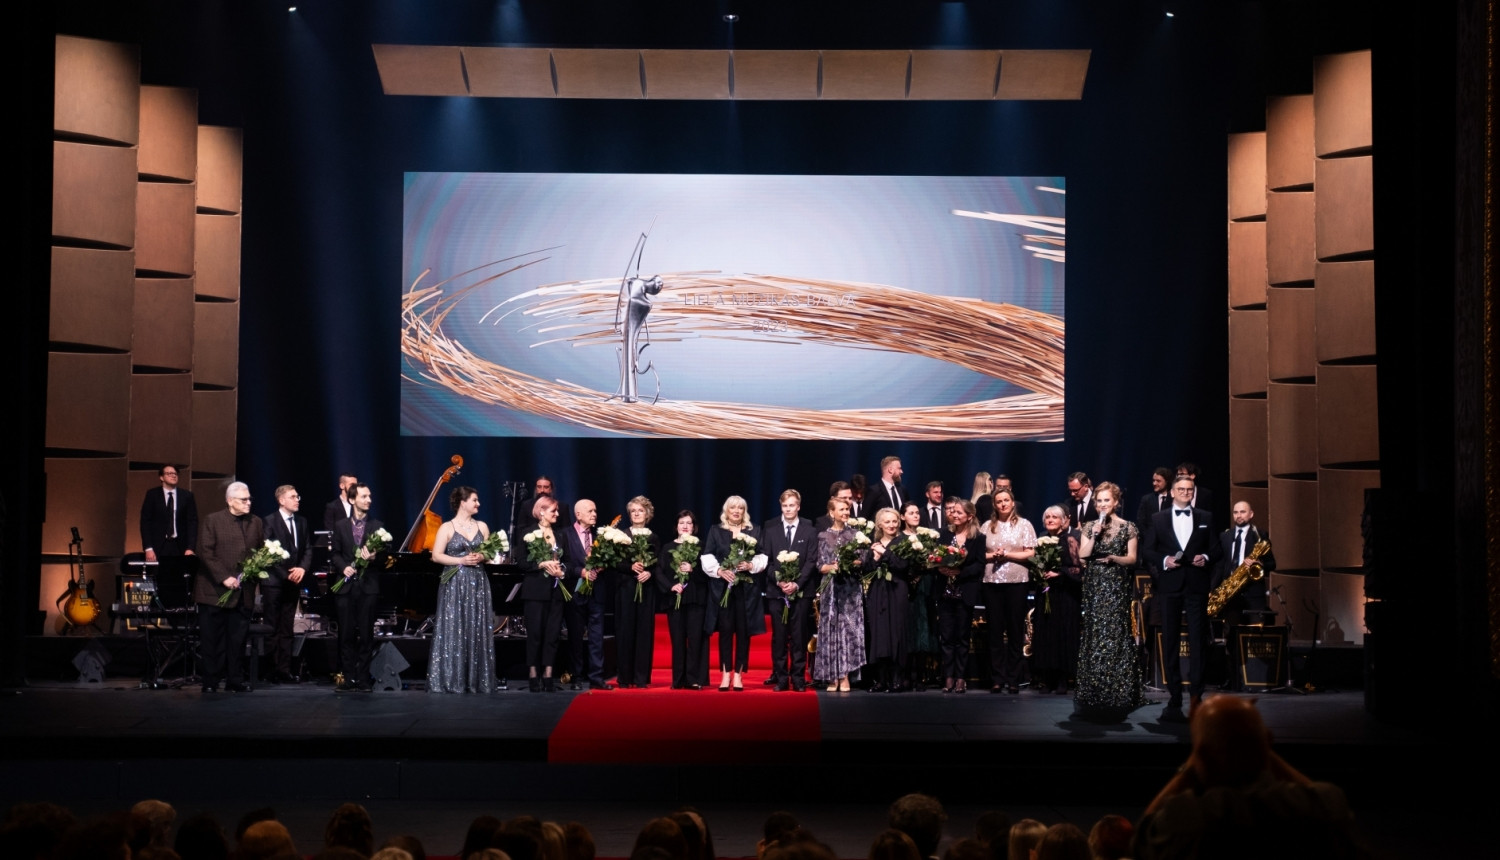 Latvian Grand Music Awards handed out